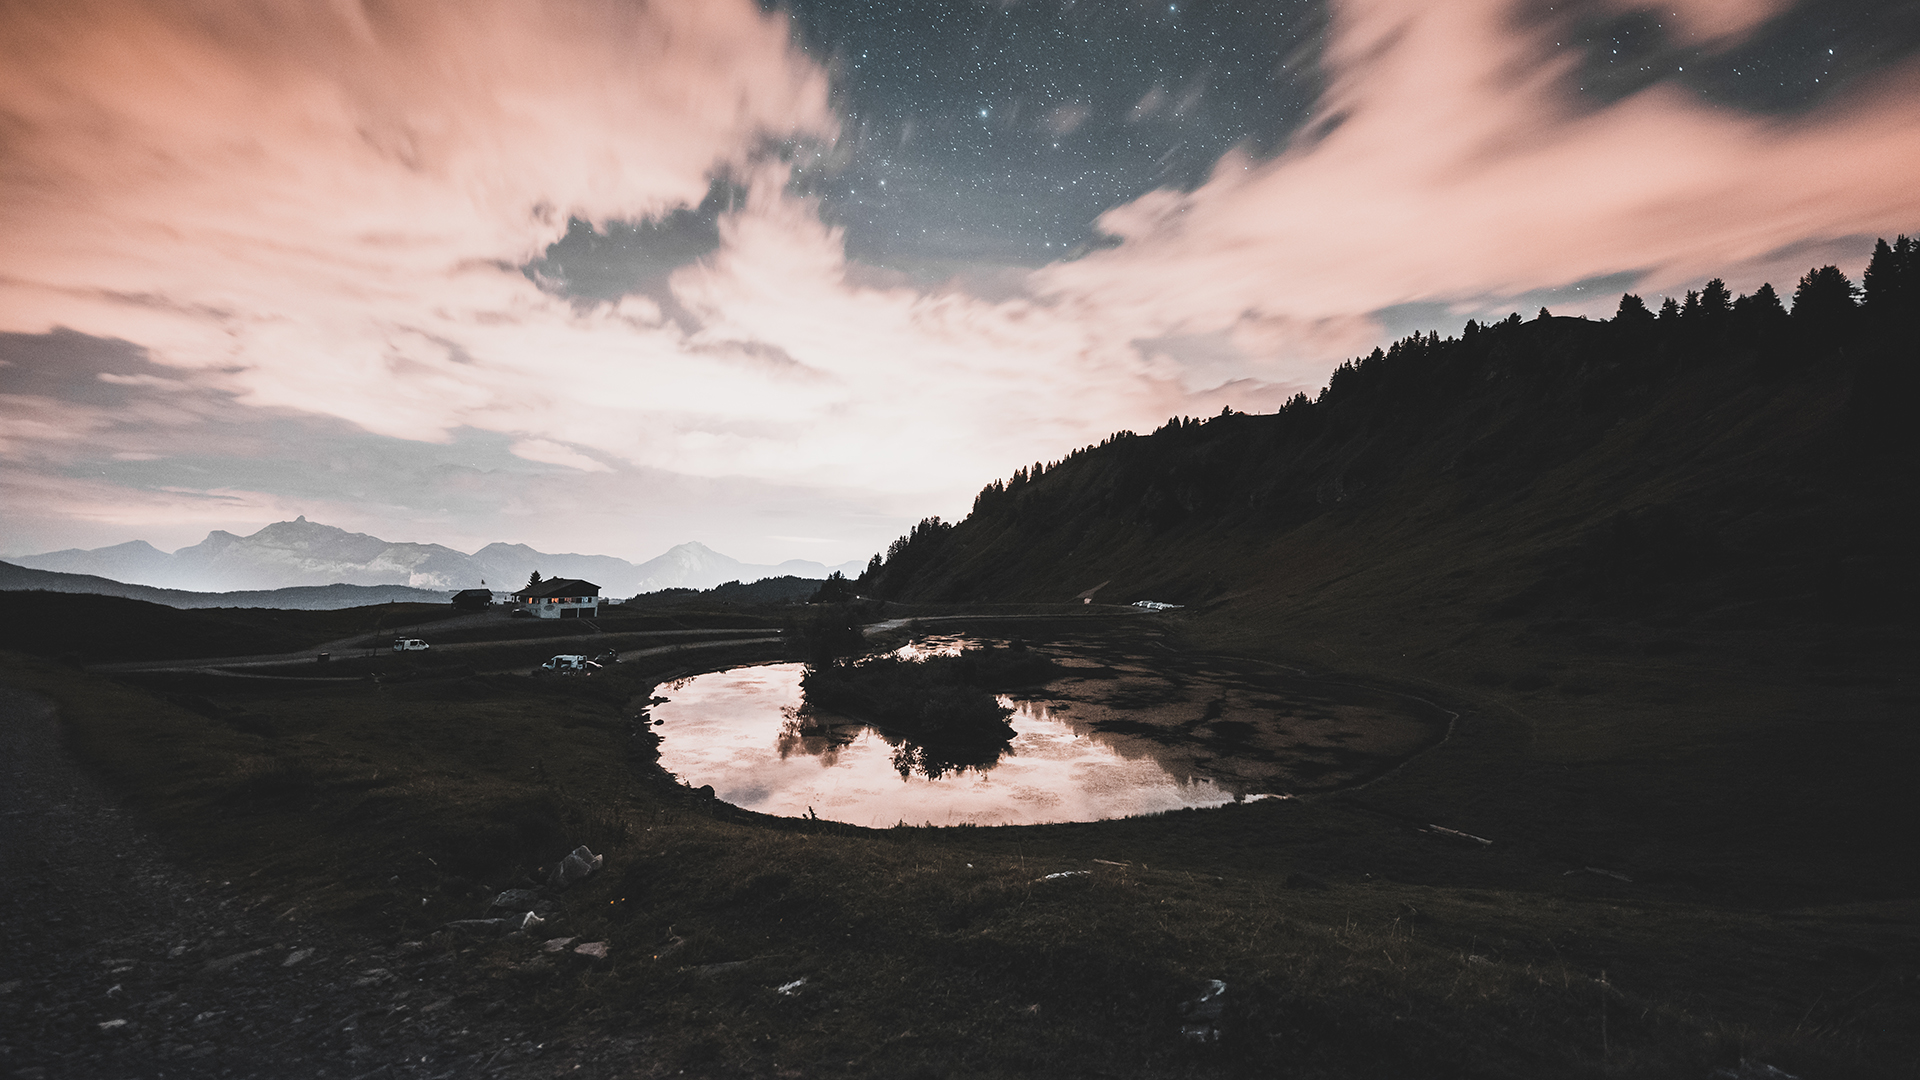 How to shoot a starry nightscape in the French Alps (or your backyard)